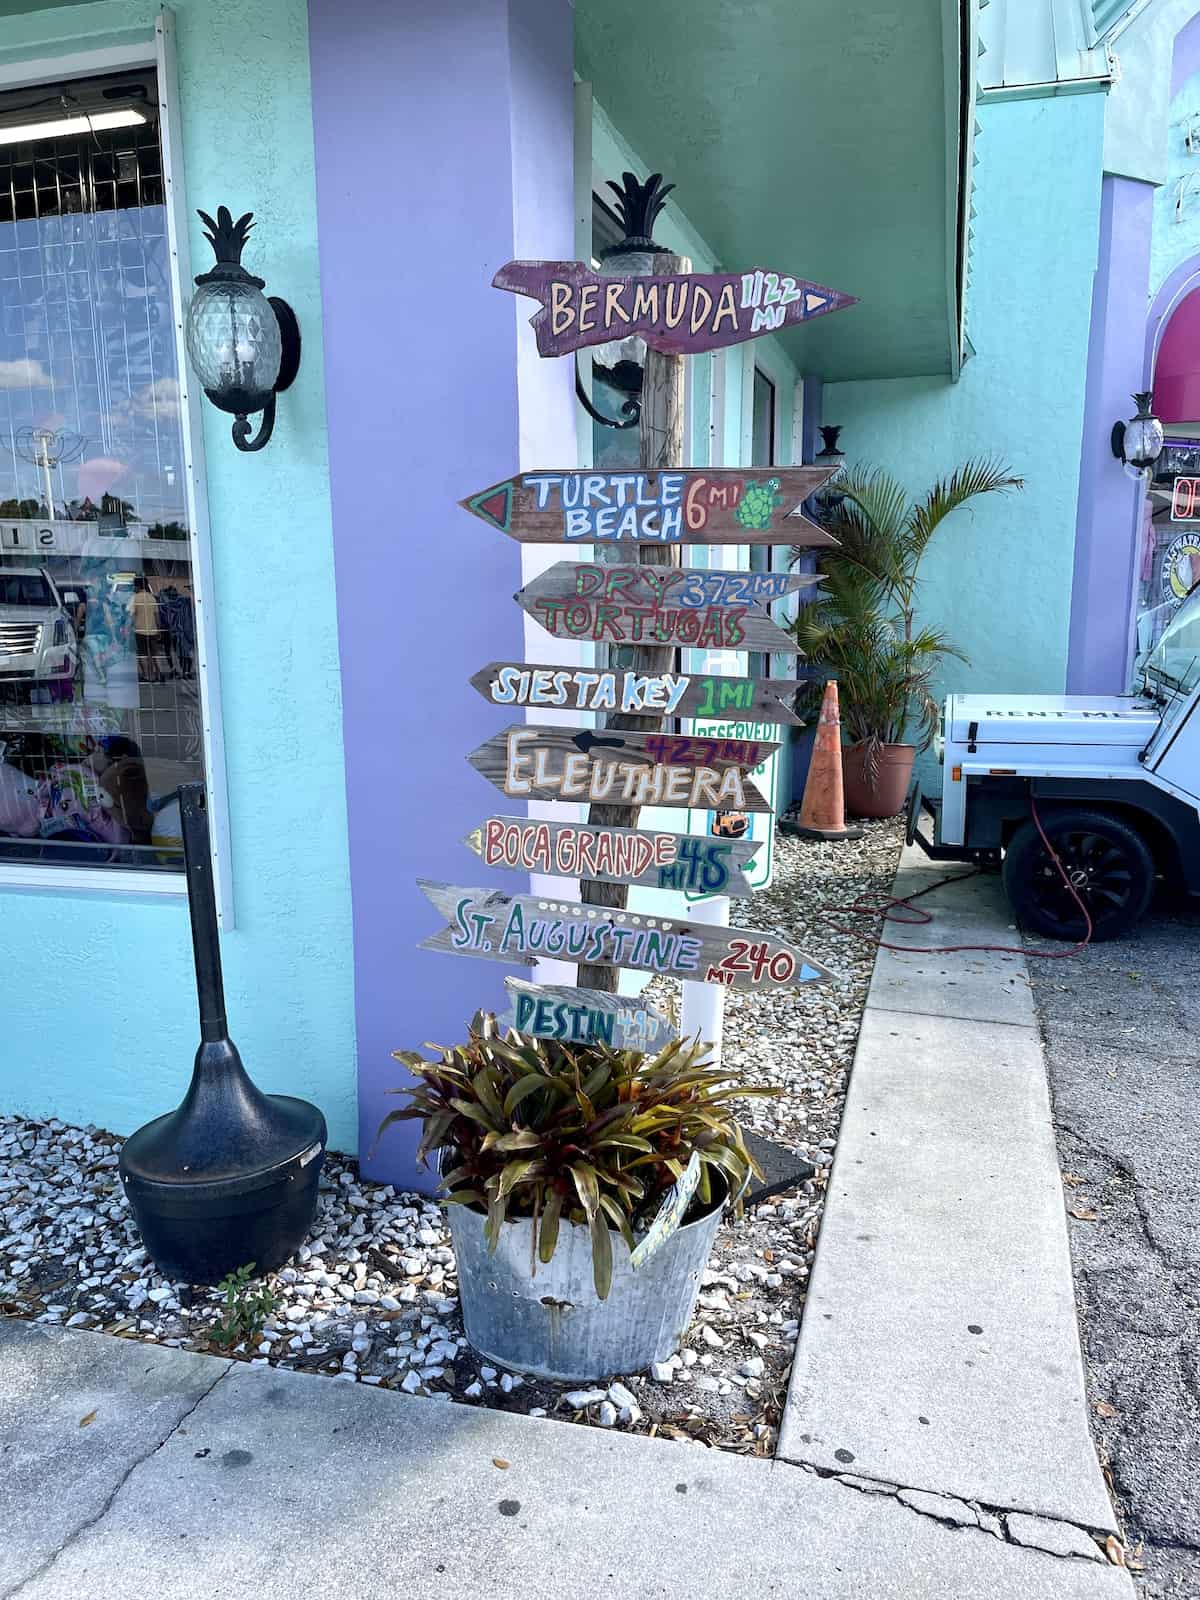 Sign showing distances from Siesta Key.